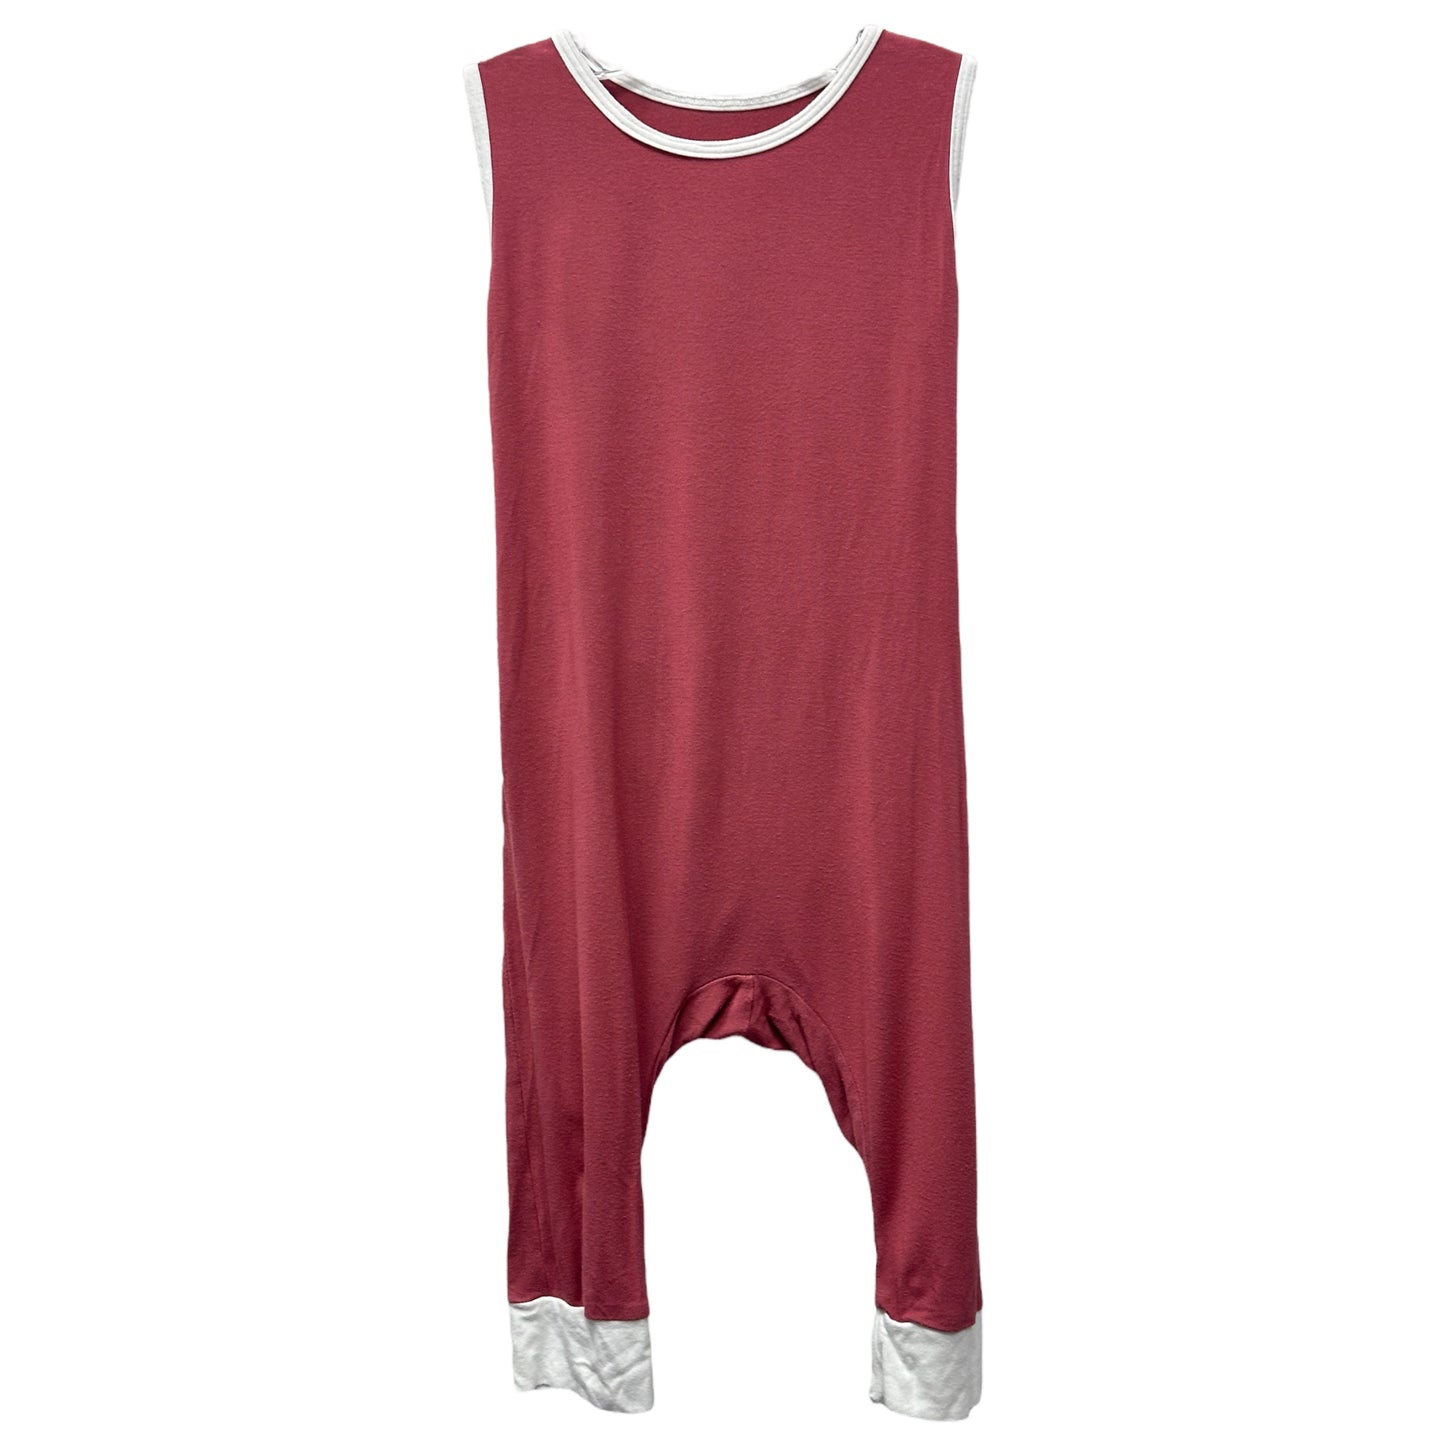 The Simple Seed 2T Romper